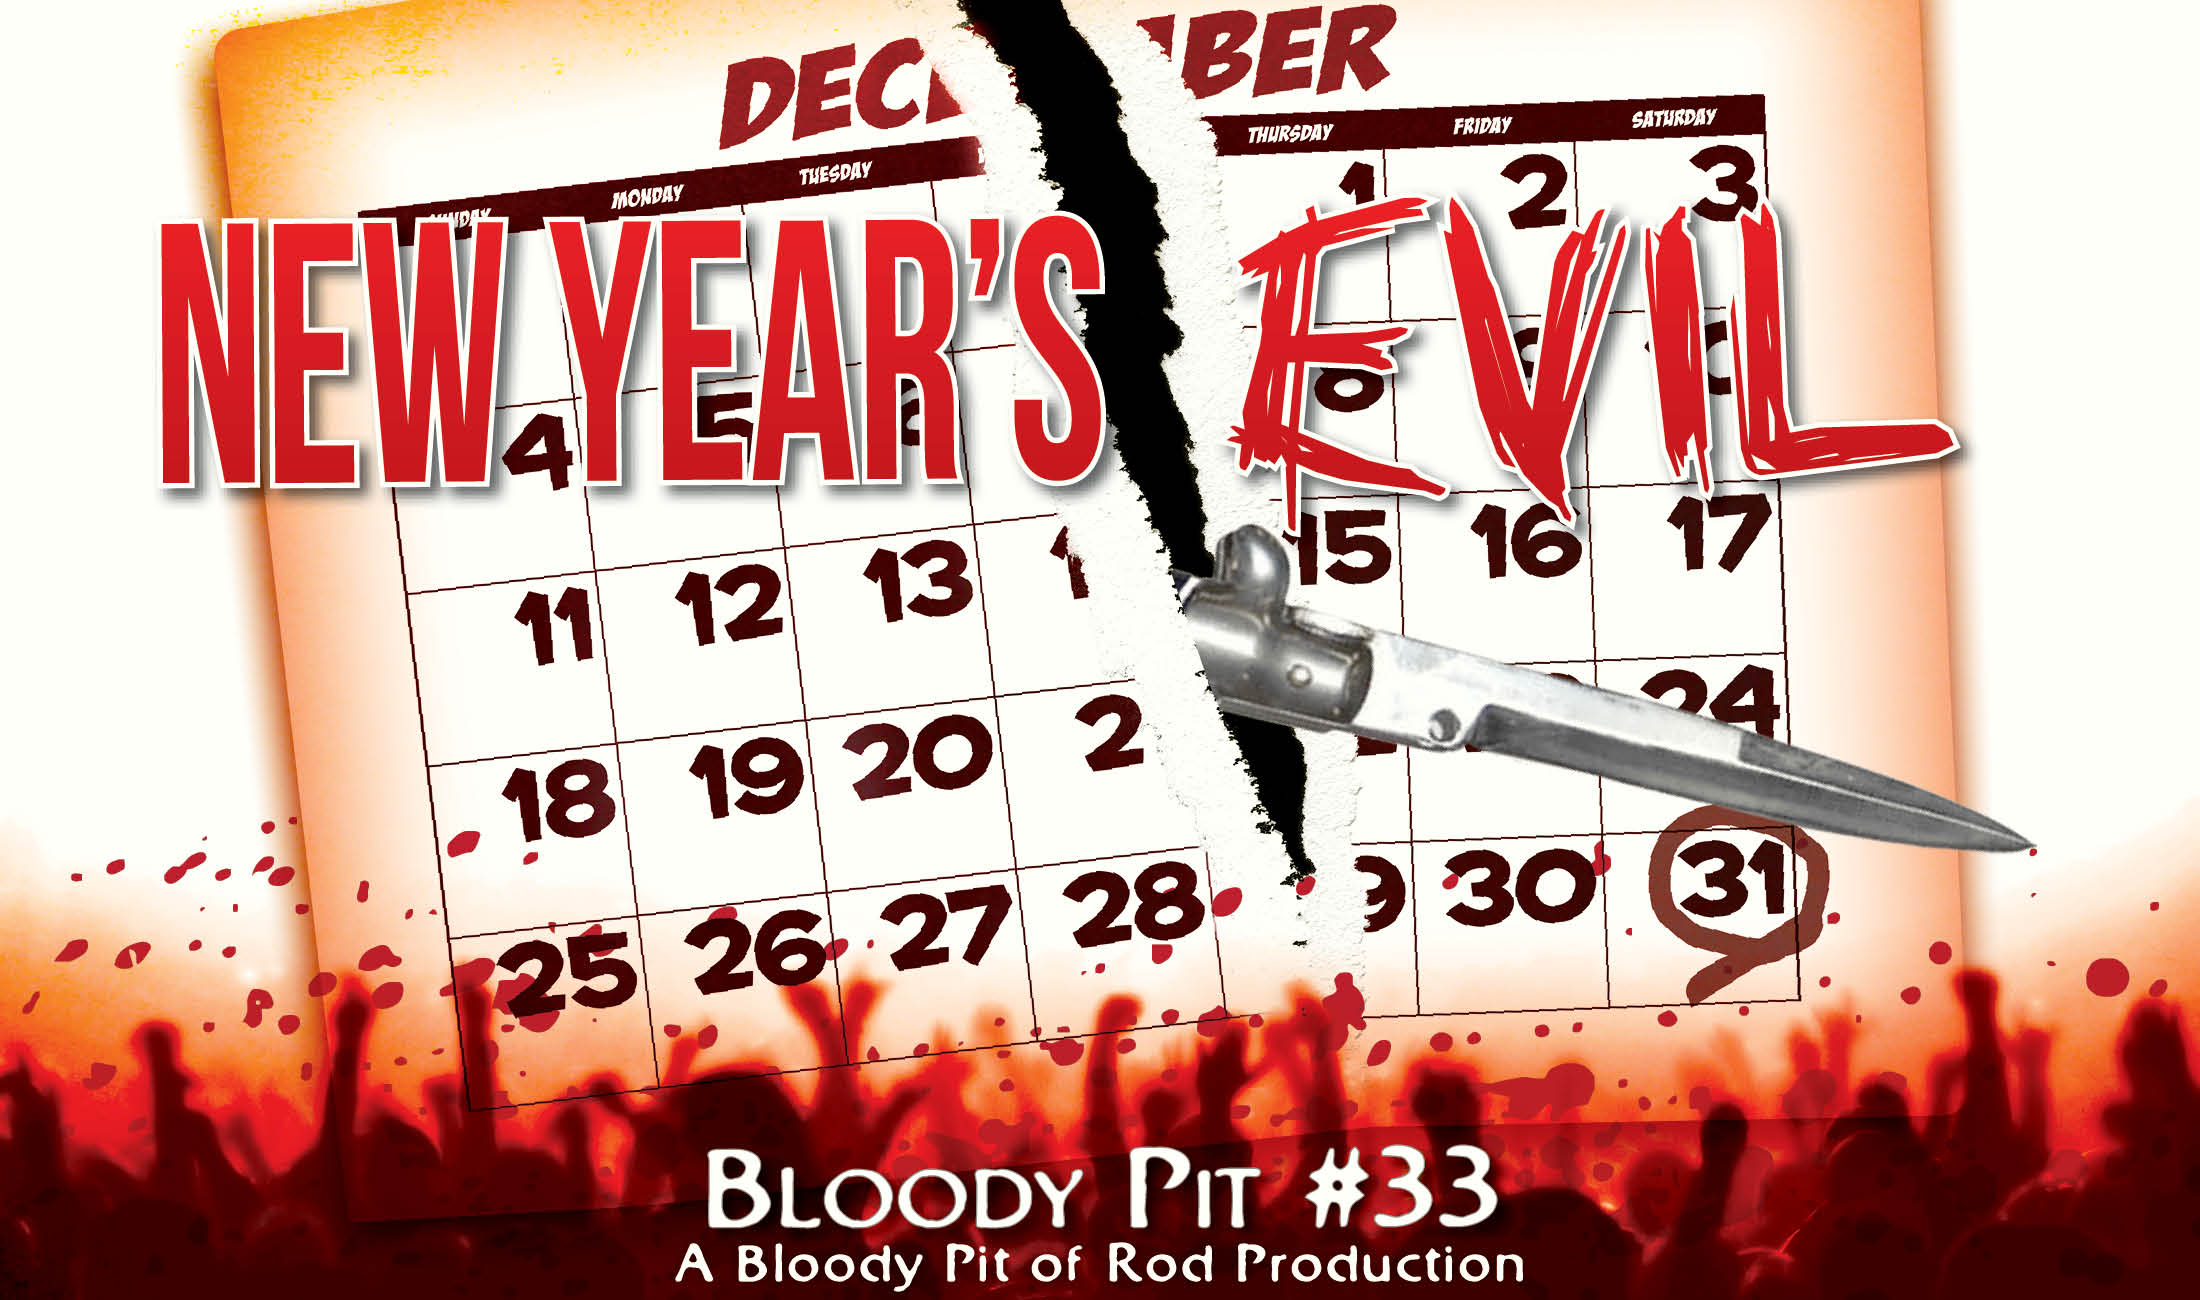 The Bloody Pit #33 - NEW YEAR’S EVIL (1980) 